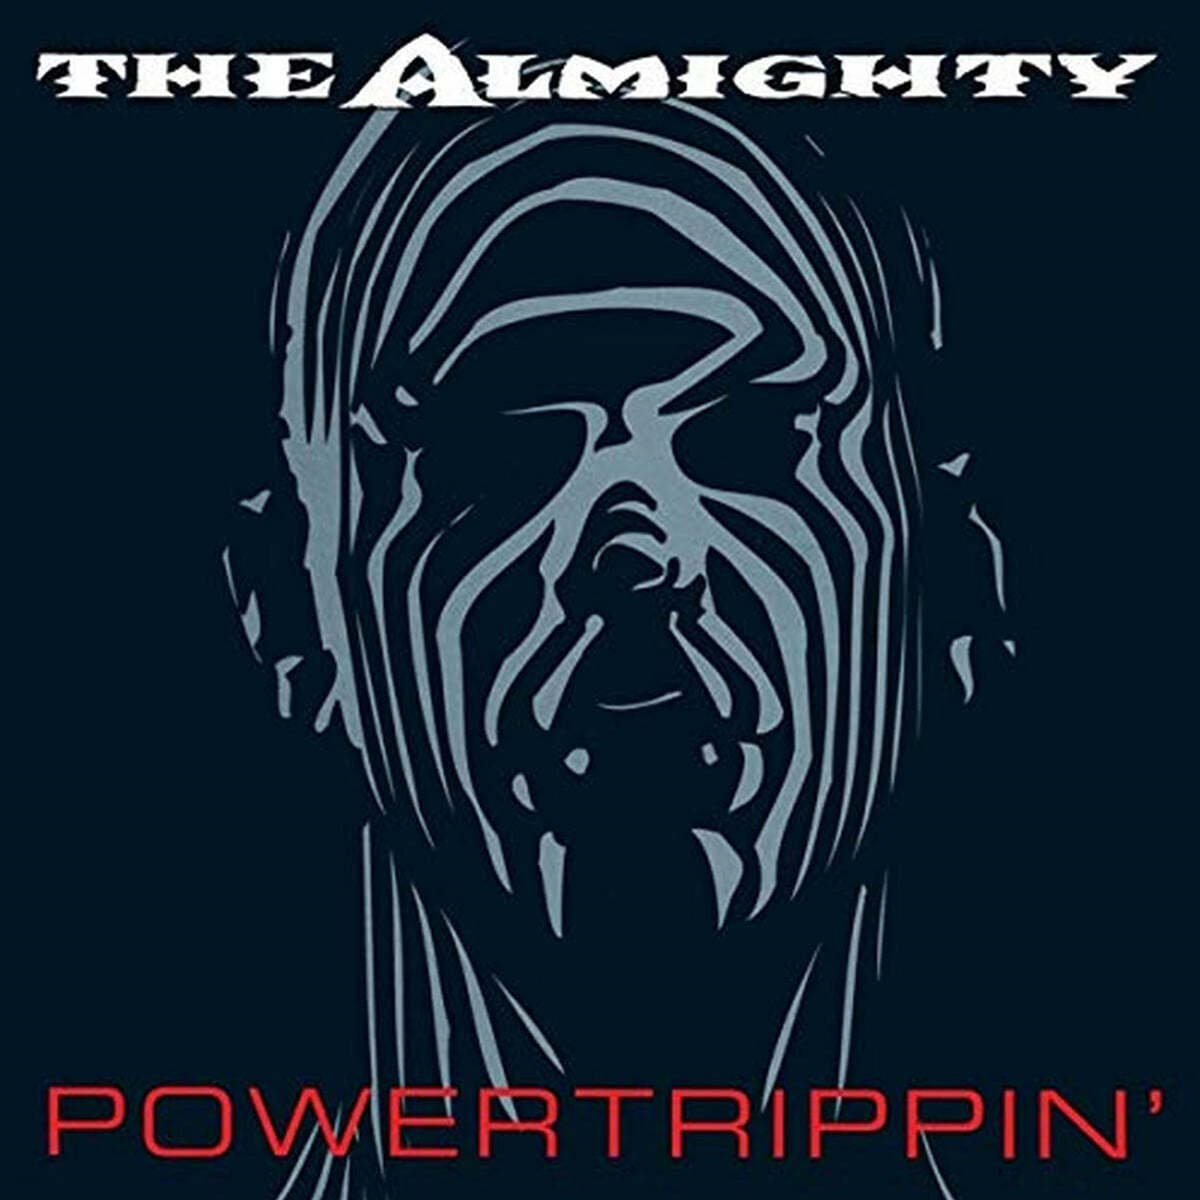 The Almighty (디 올마이티) - Powertrippin' 